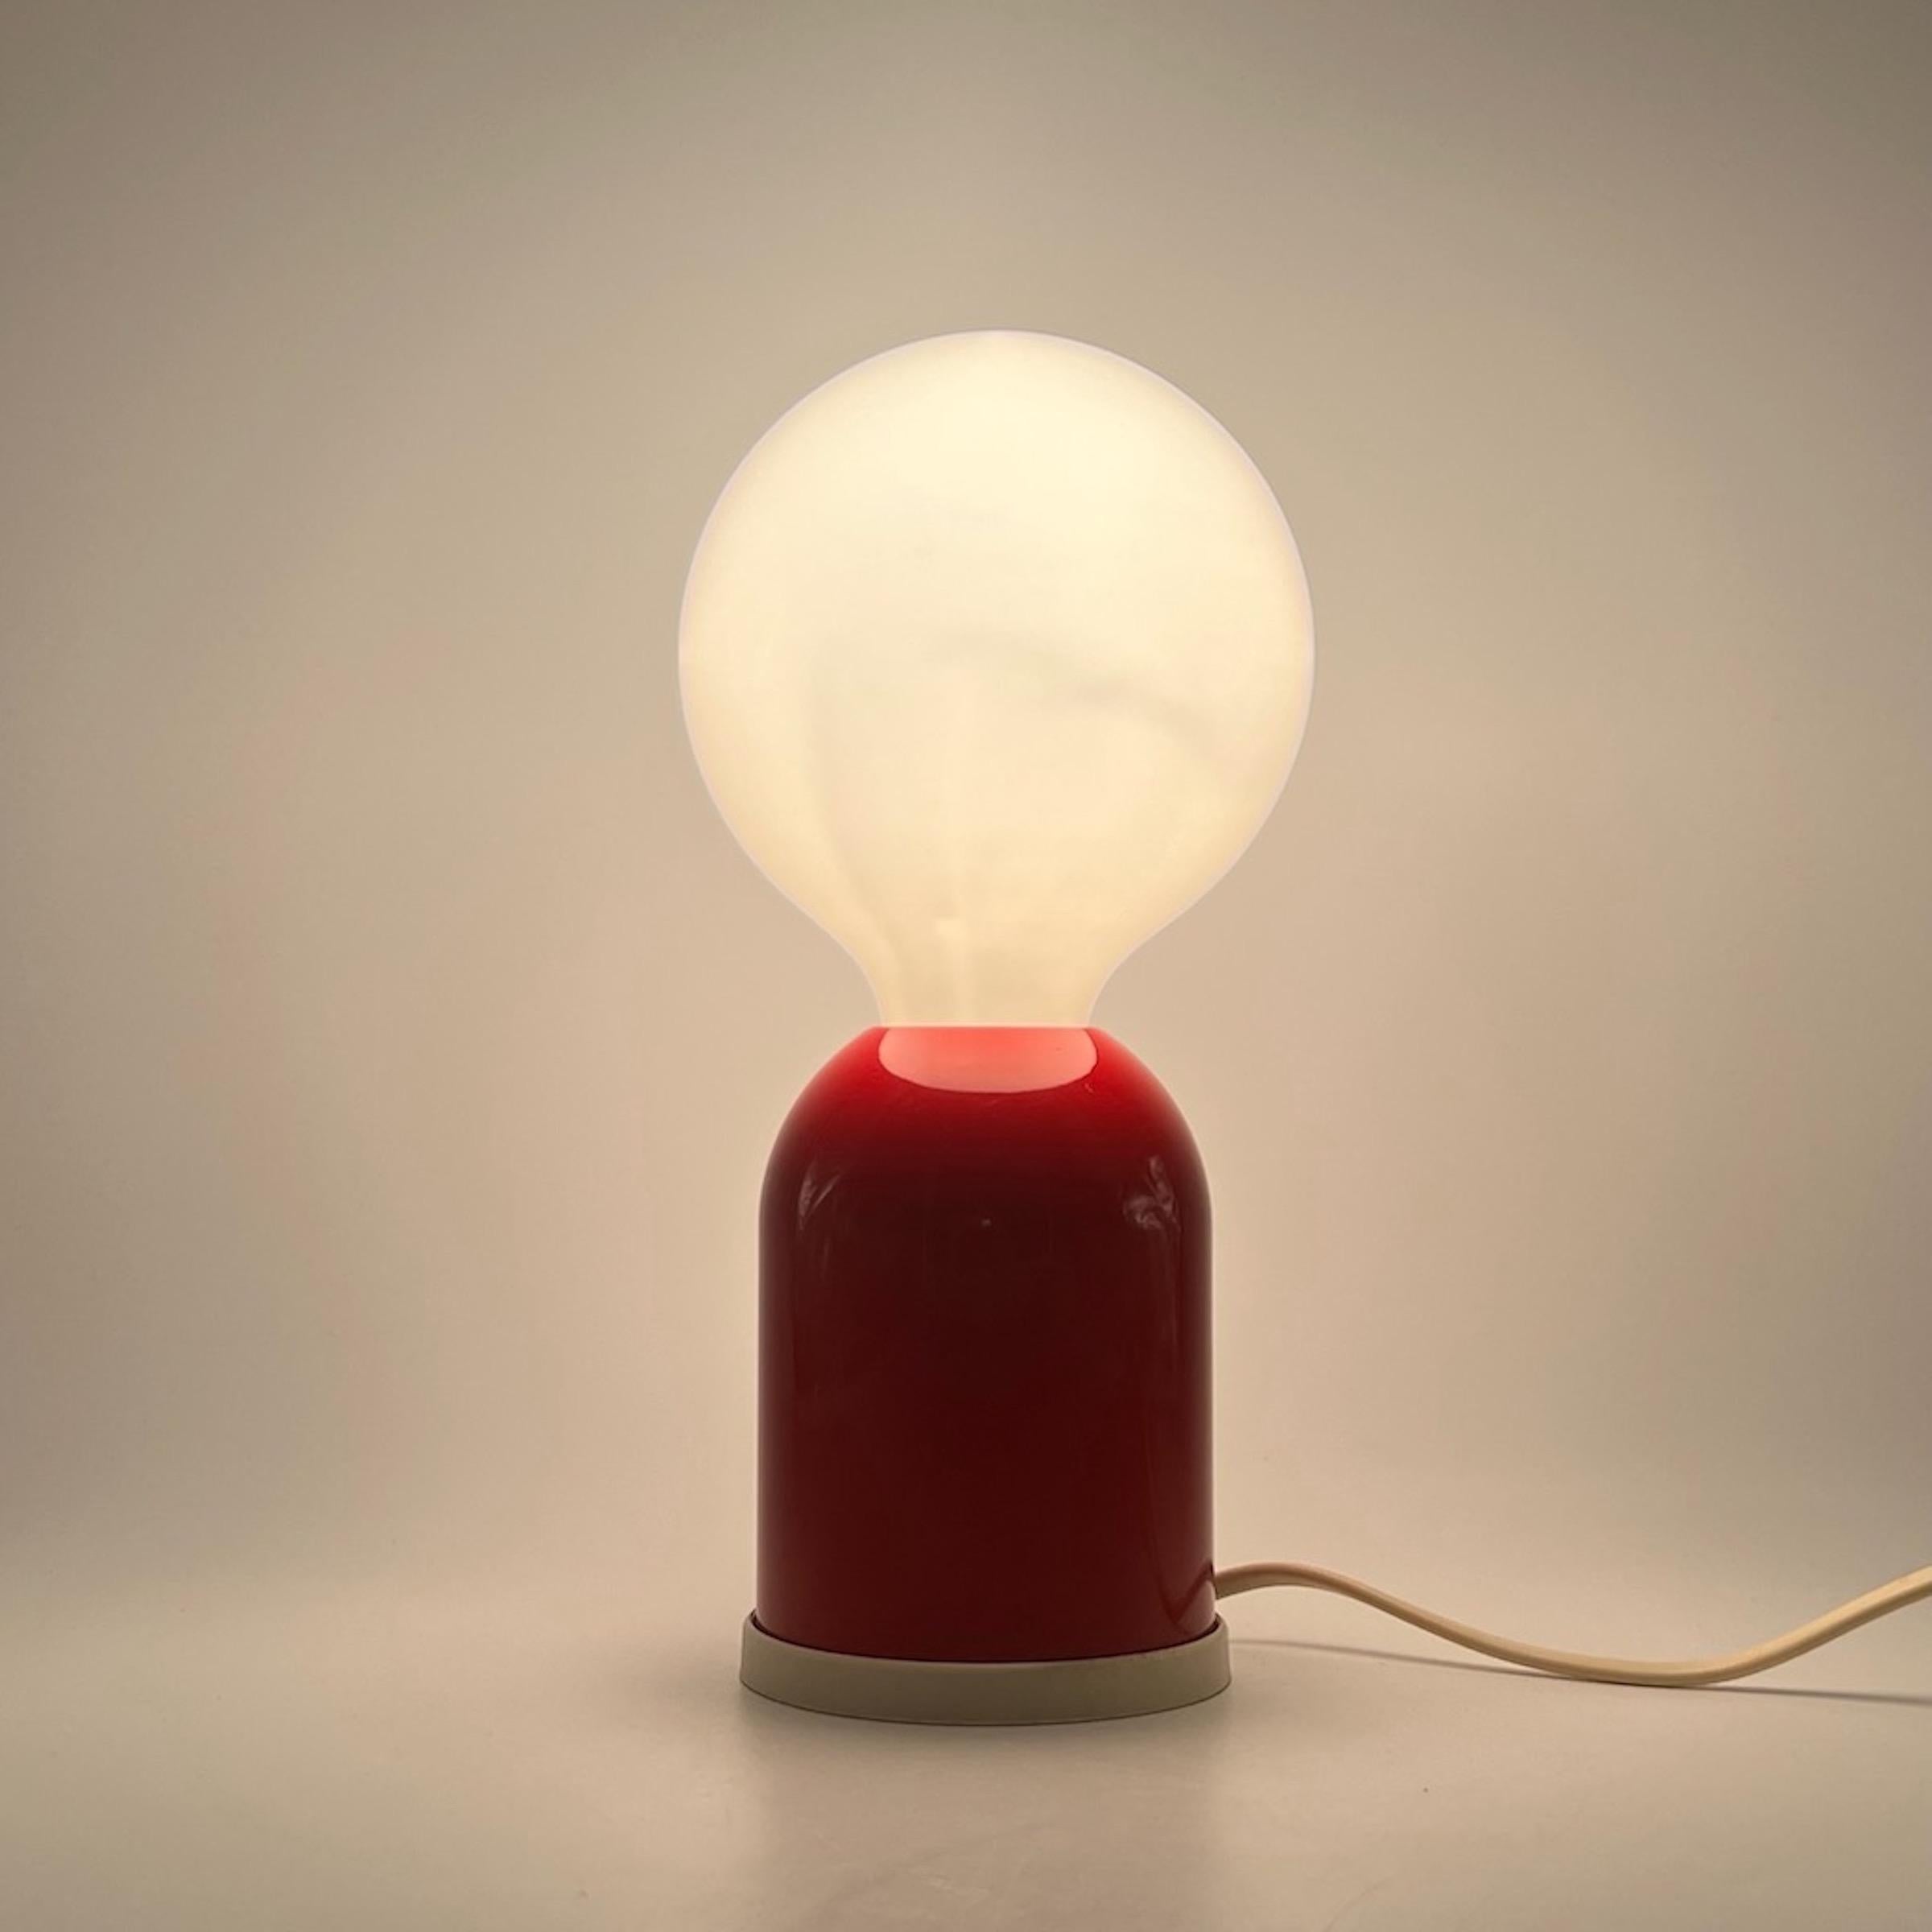 Beautiful patent design lamp with a distinctive antropomophic shape manufactured by Targetti in the 80s.

The base is made of lacquered red metal. The big light bulb (included) evokes the head of a little man. A minimalistic and quirky design